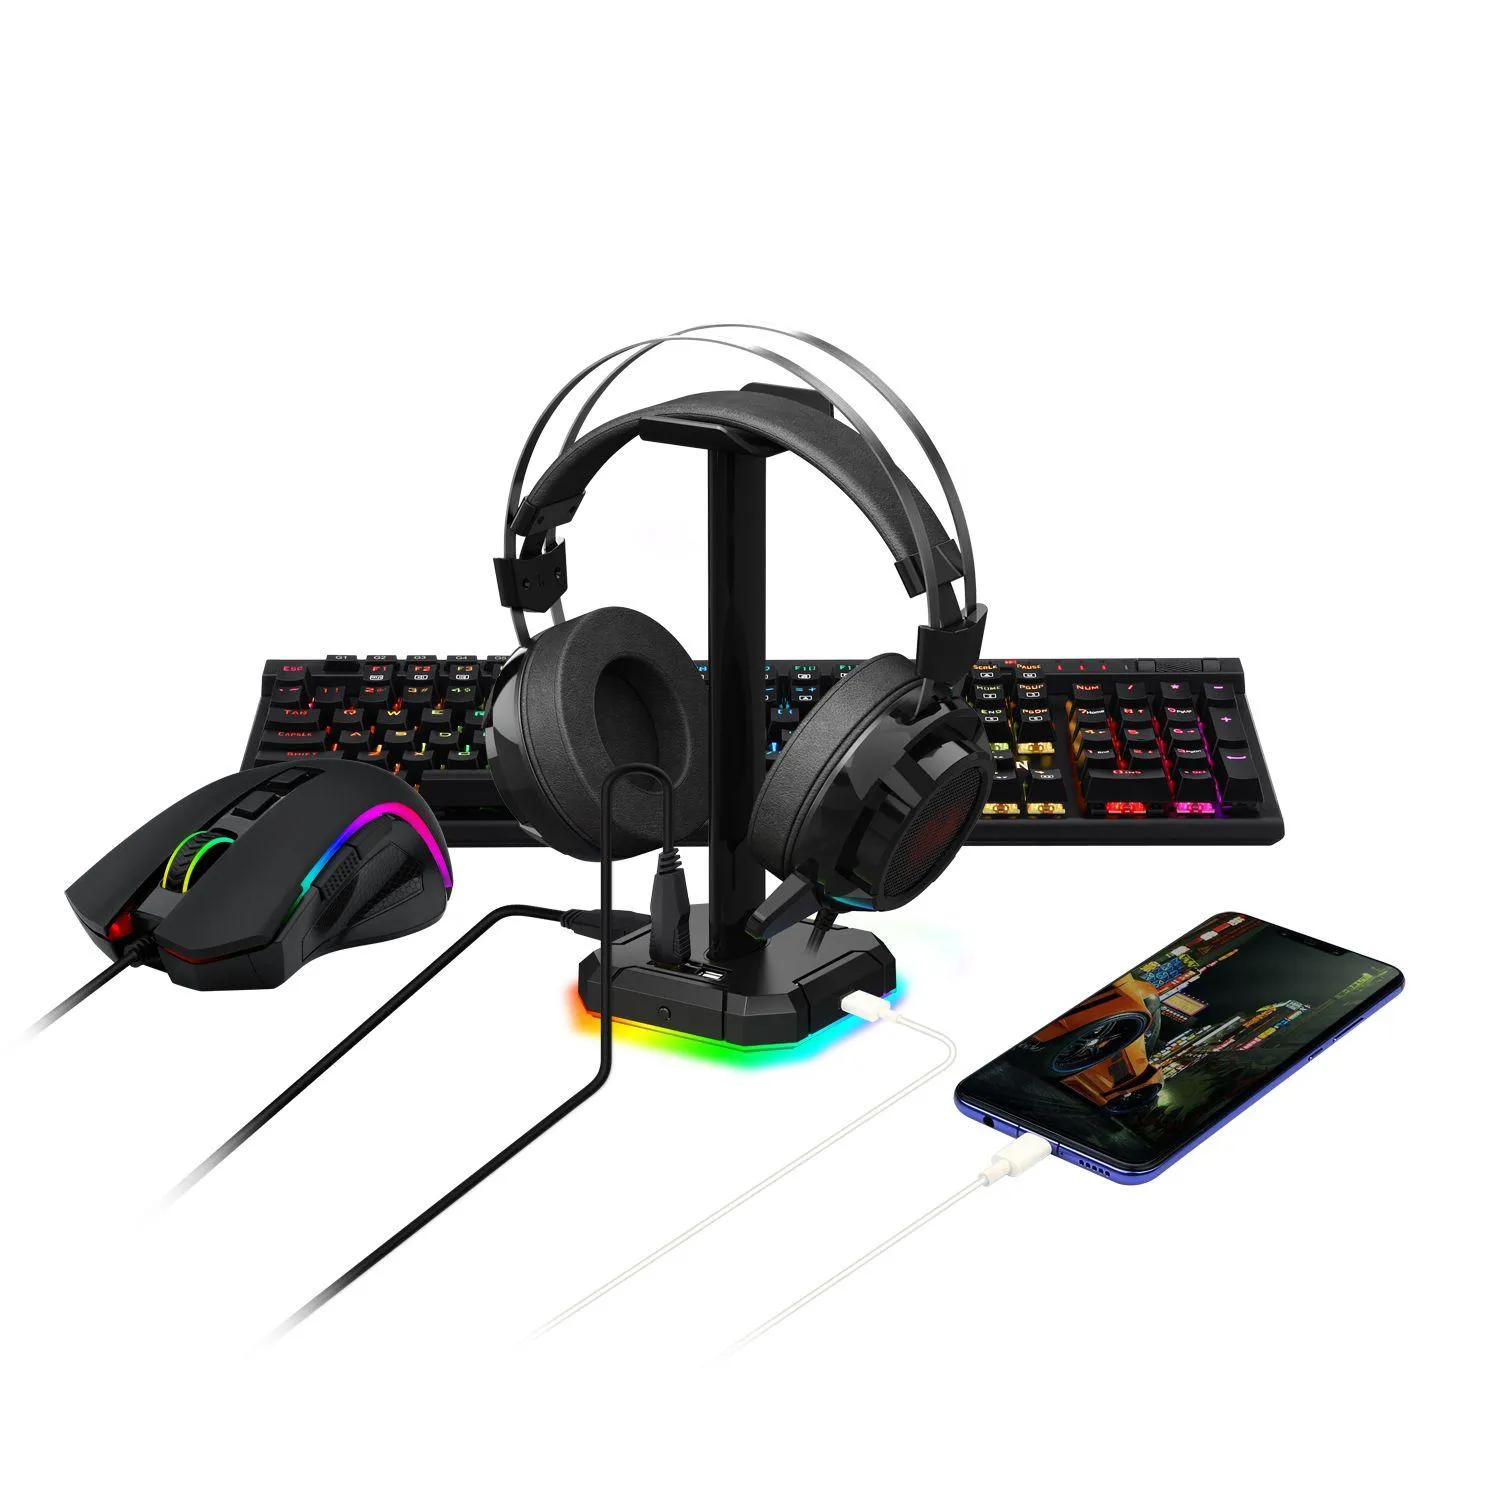 n HA300 Gaming Headset Stand RGB Backlit Aluminum Supporting Bar Non-Slip Solid Rubber Base 4X USB 2.0 for All Headphones